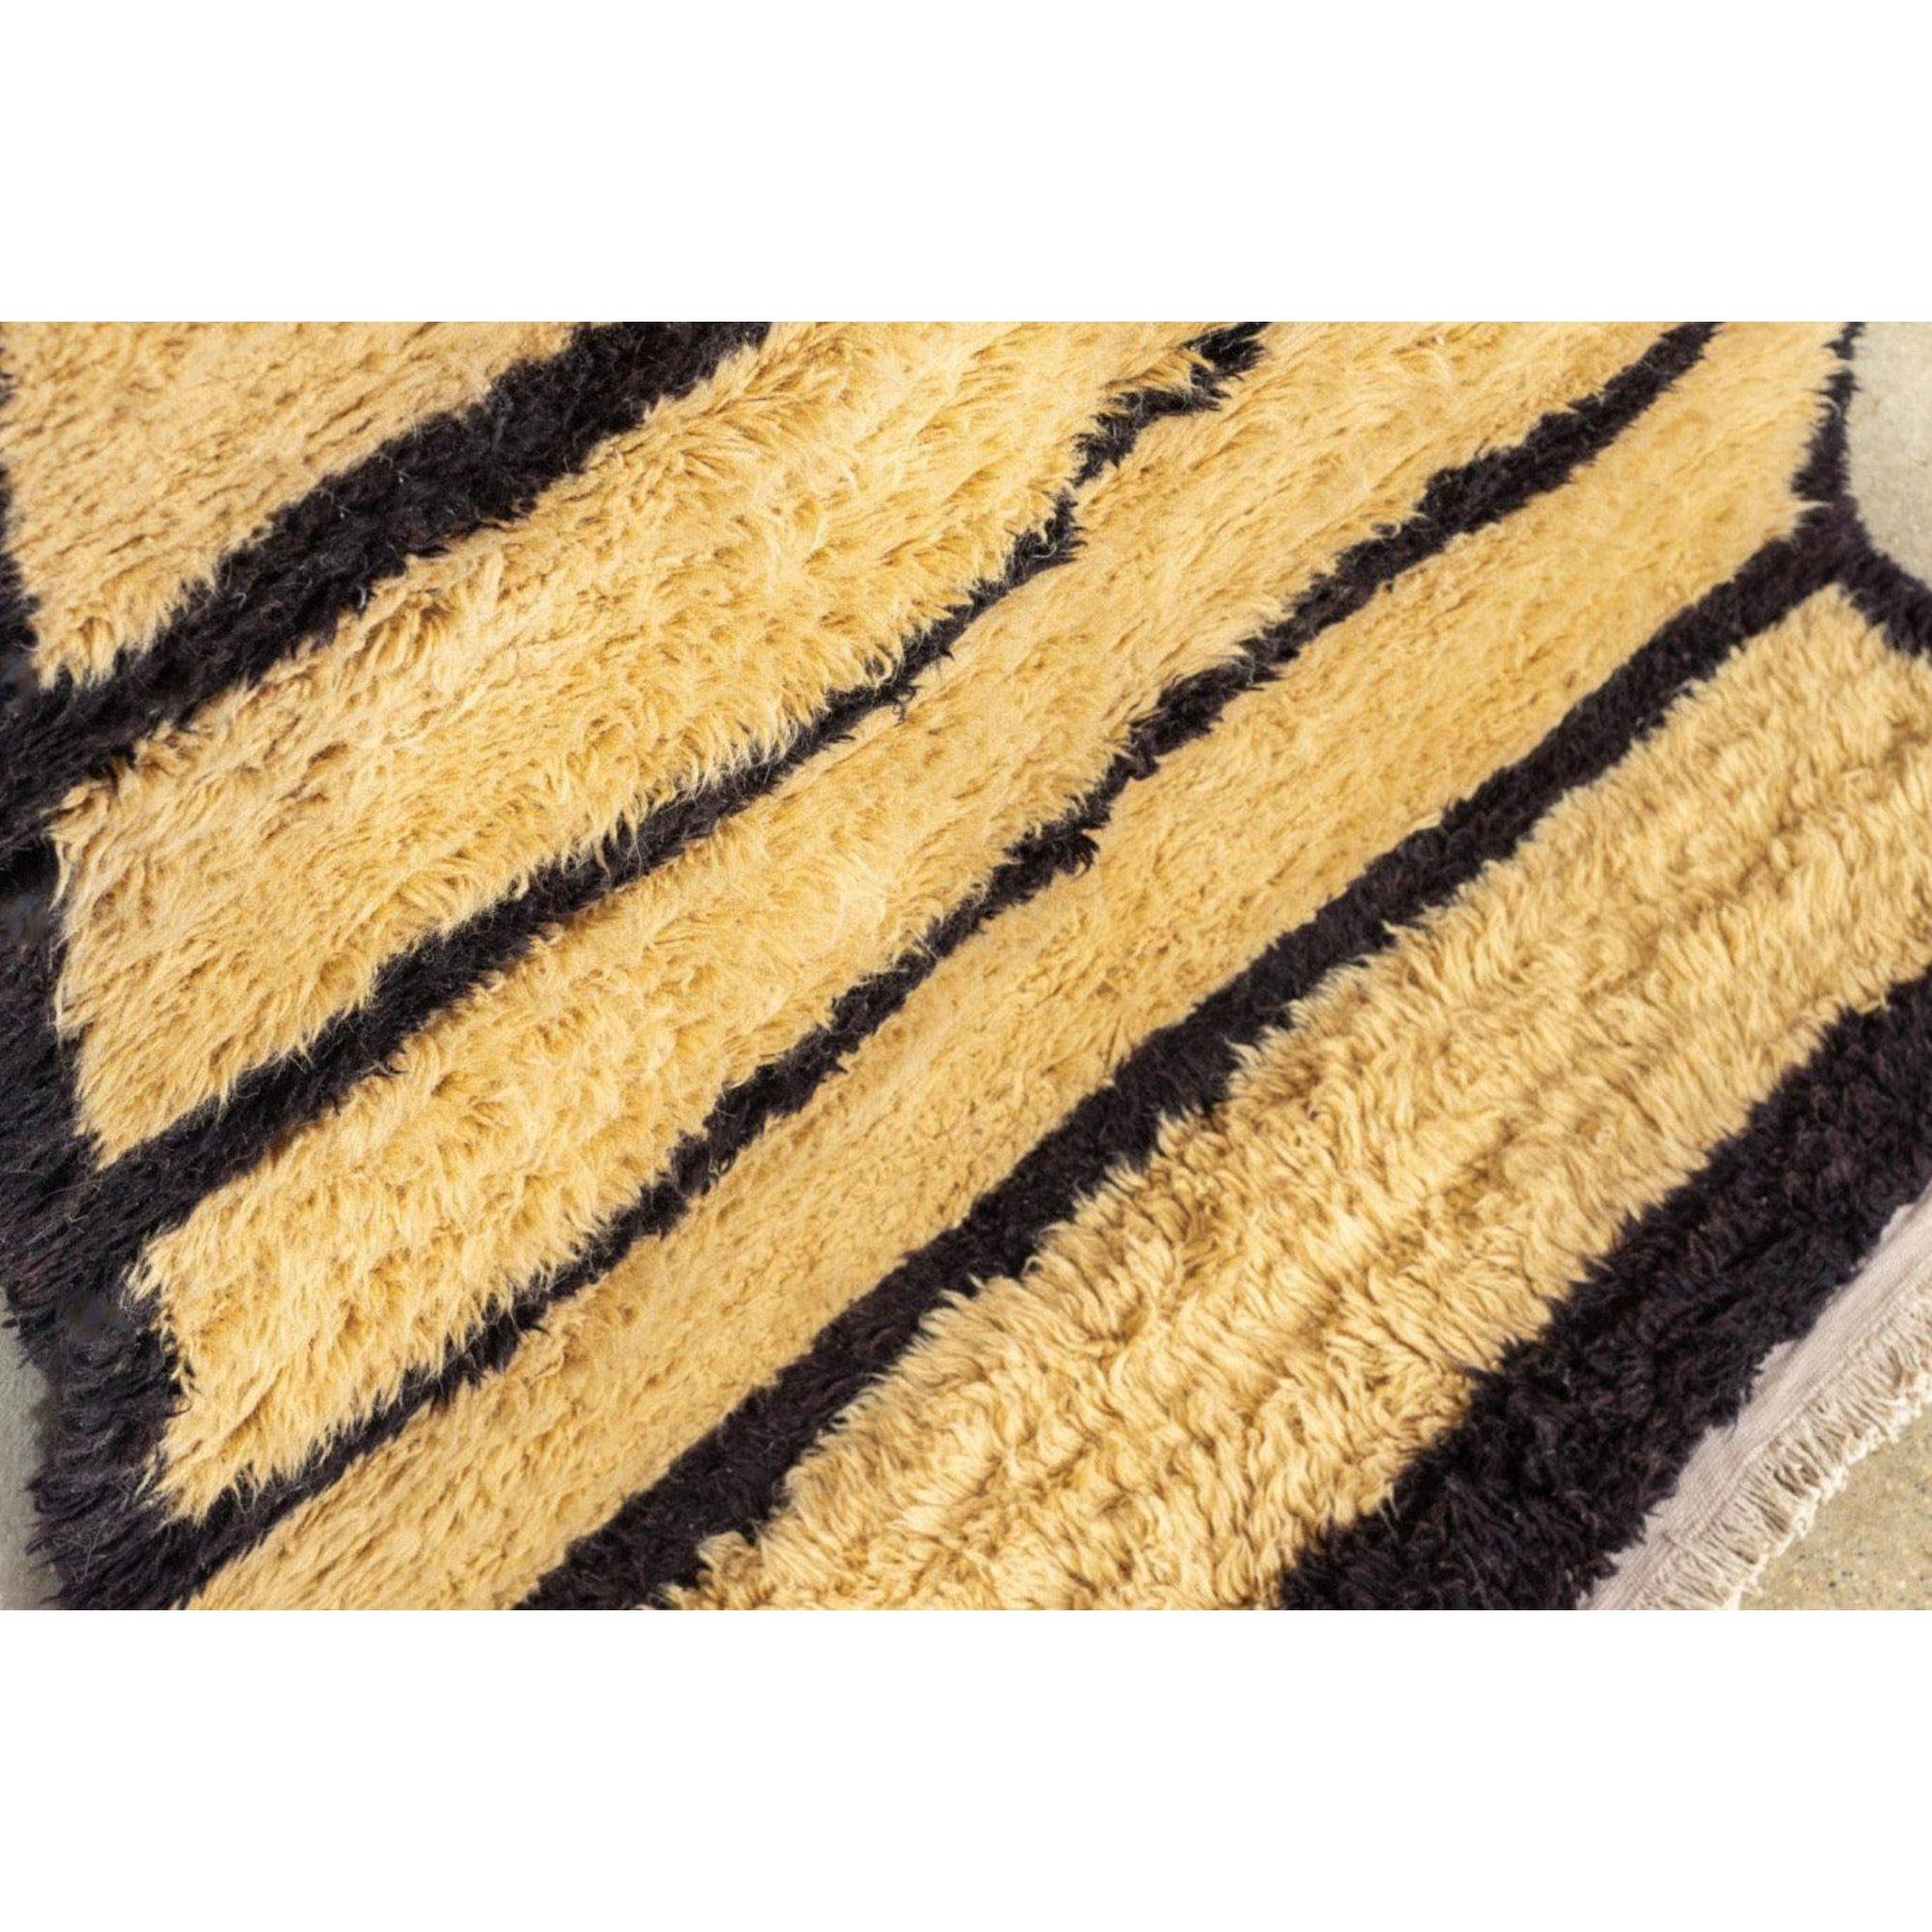 Vintage Turkish Floor Rug in Beige and Black Striped Shaggy Wool For Sale 1